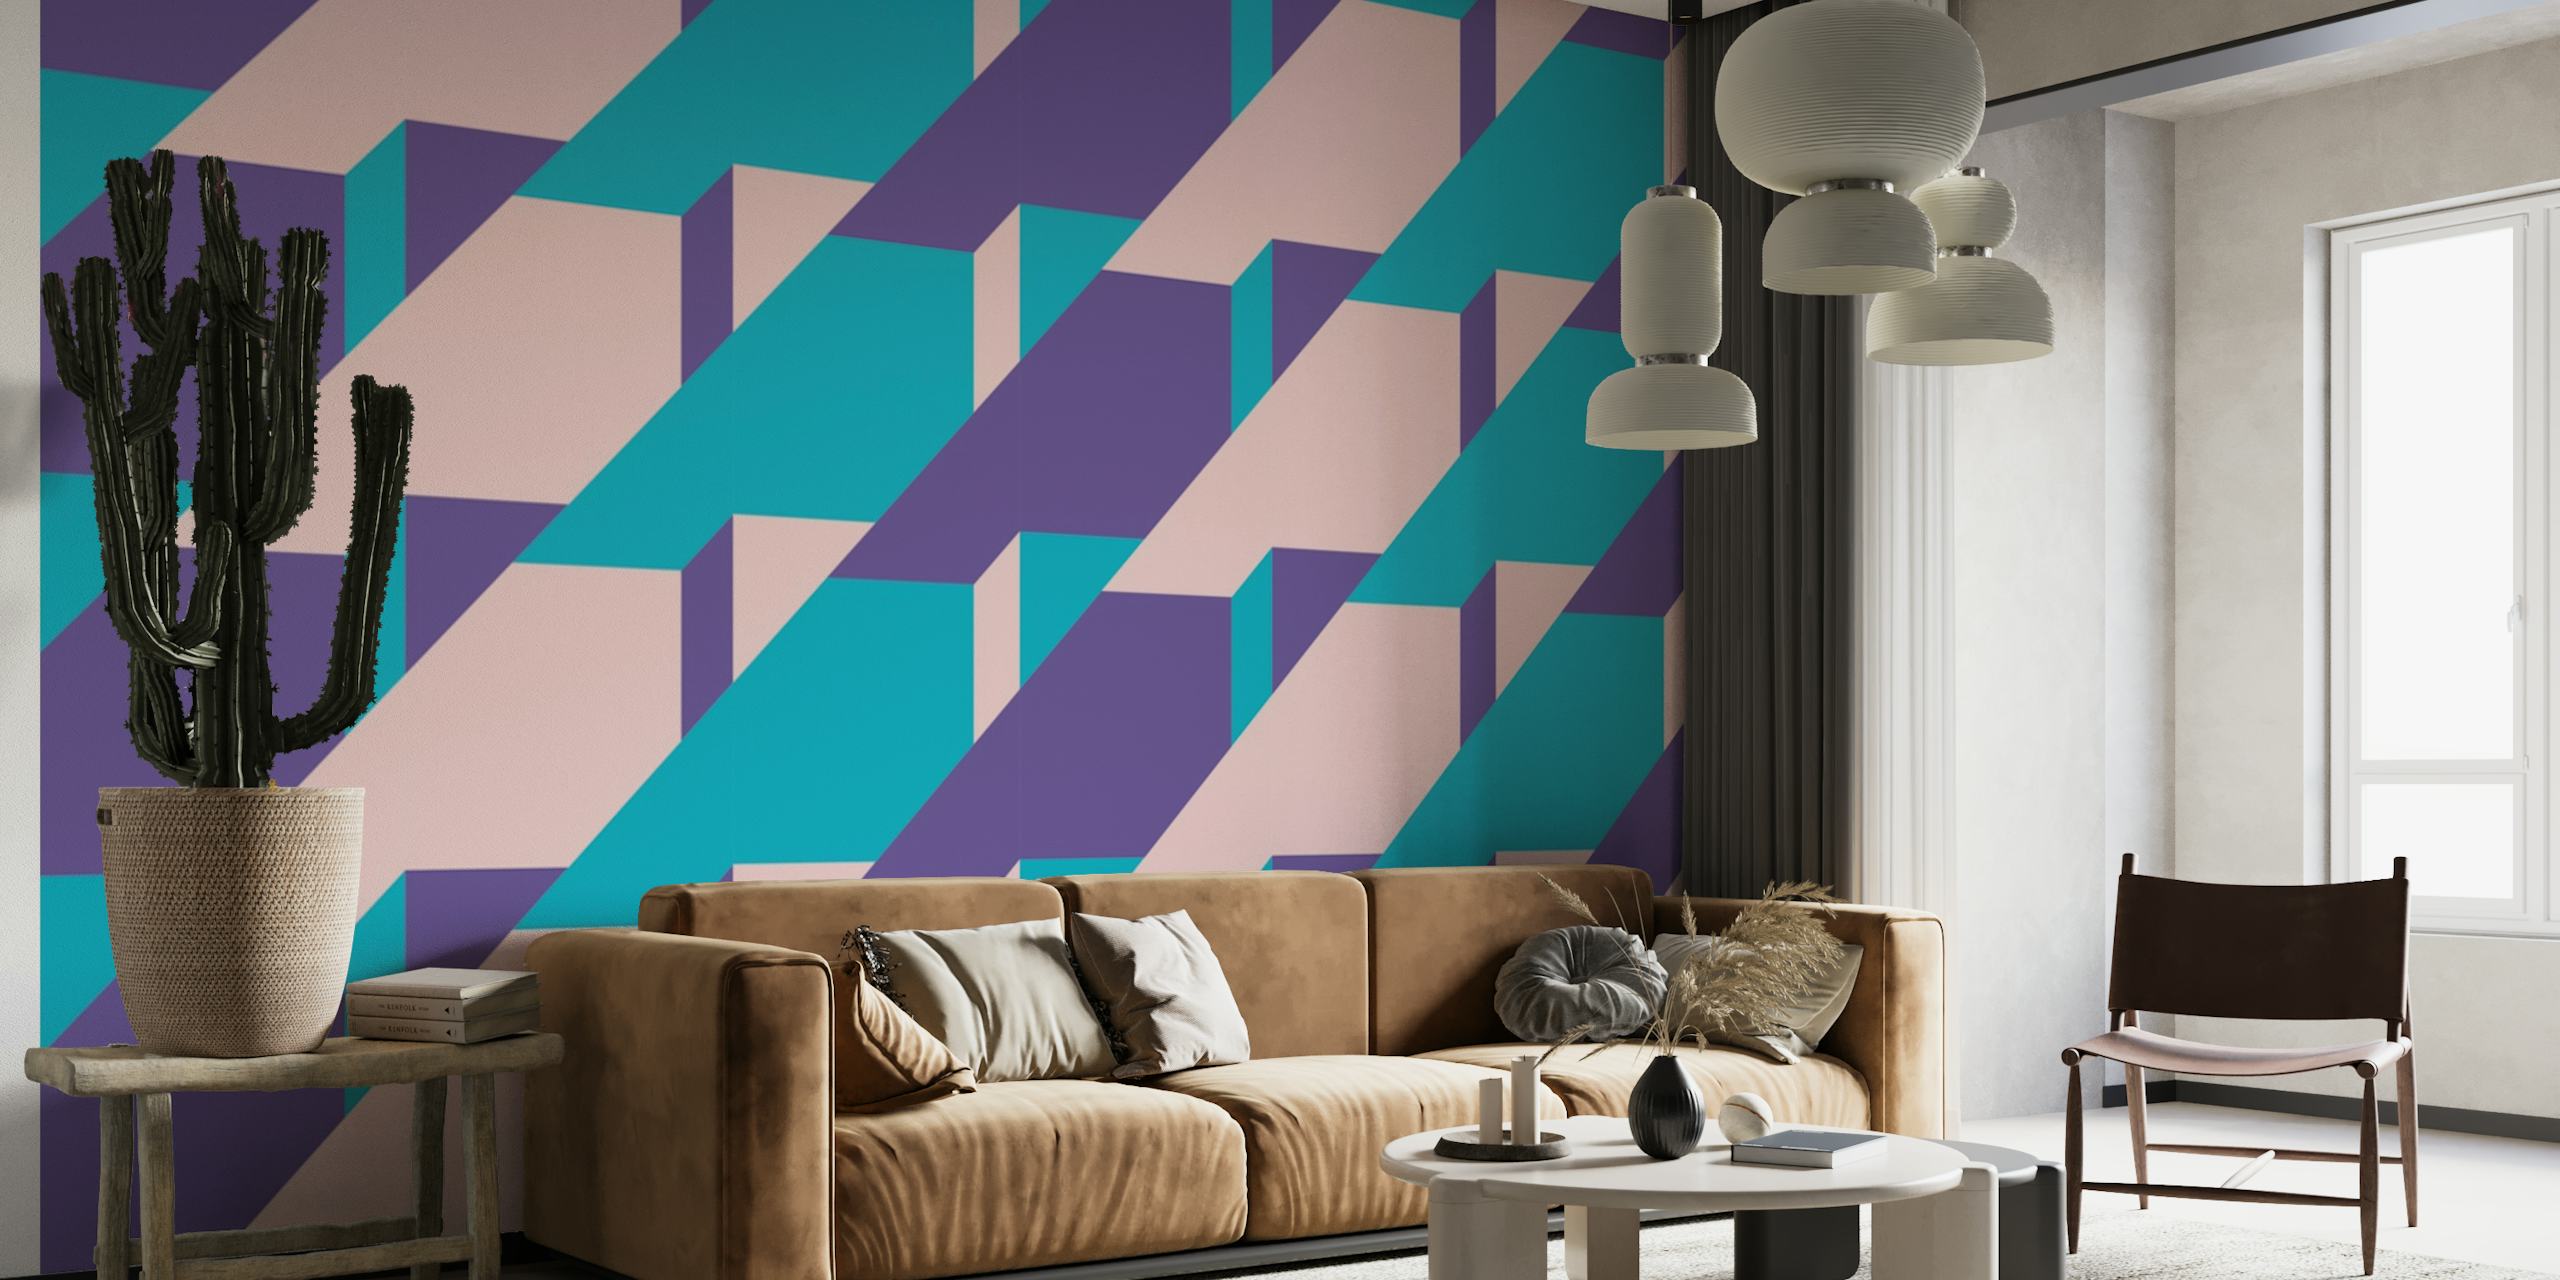 Geometric shapes wall mural in purple and blue shades with a glowing abstract design